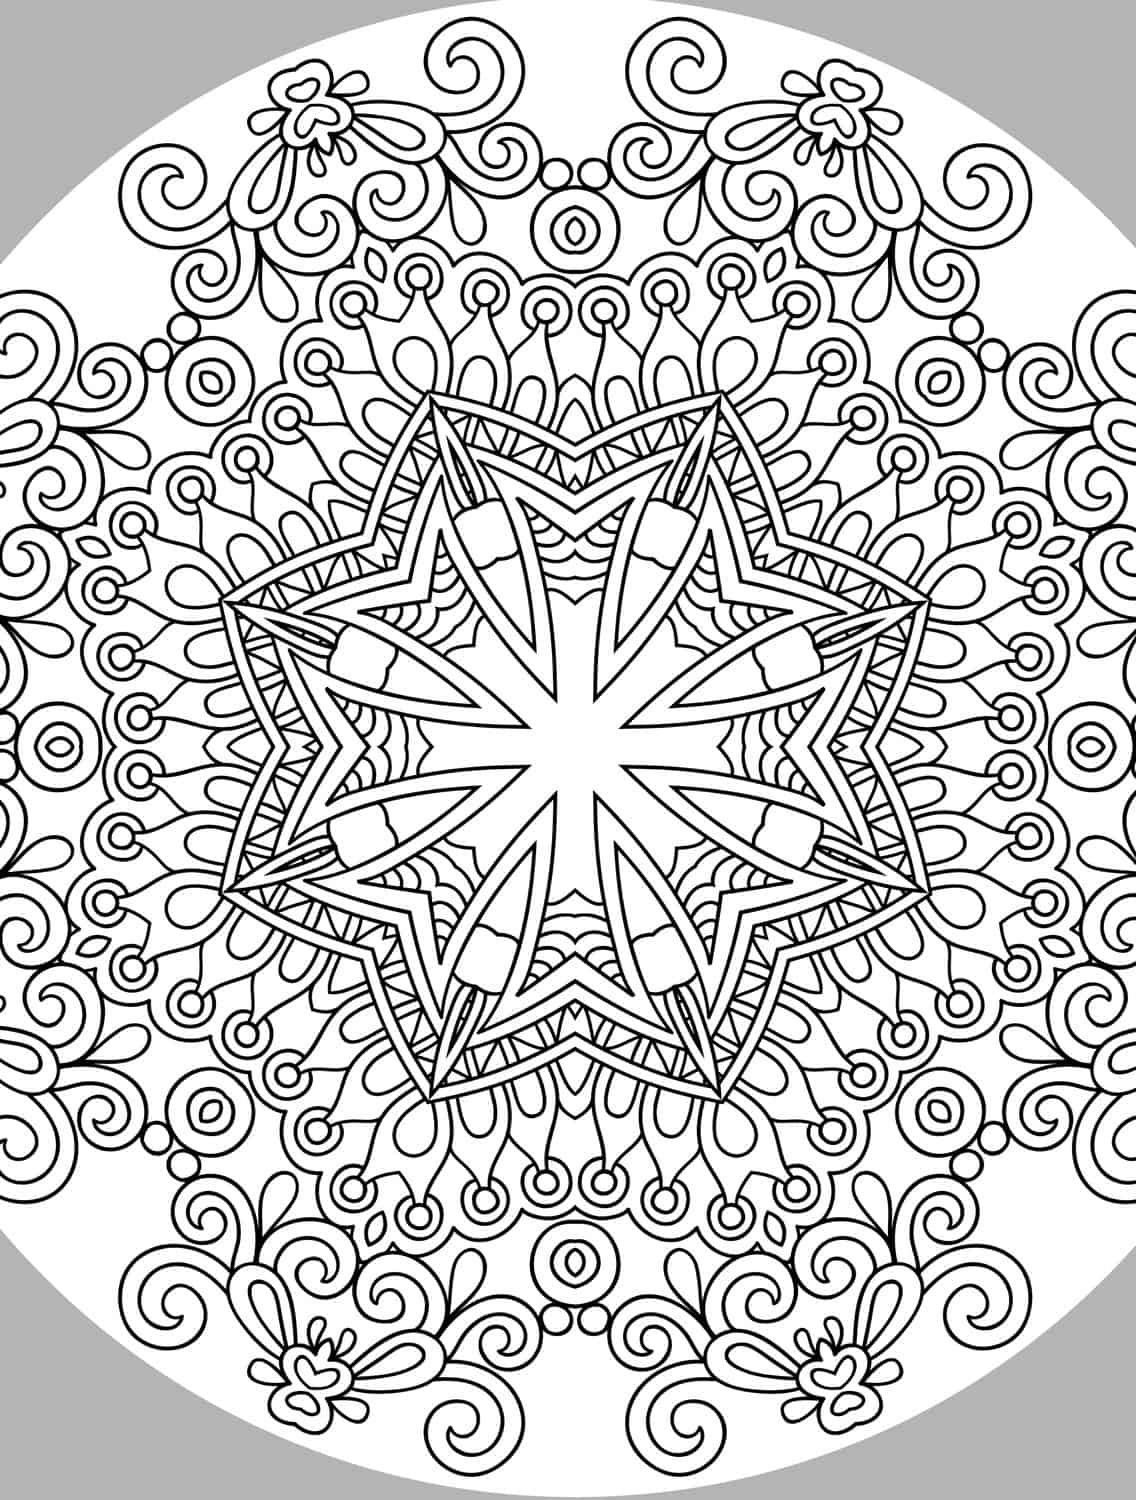 Coloring Sheets For Adults Printable
 10 Free Printable Holiday Adult Coloring Pages